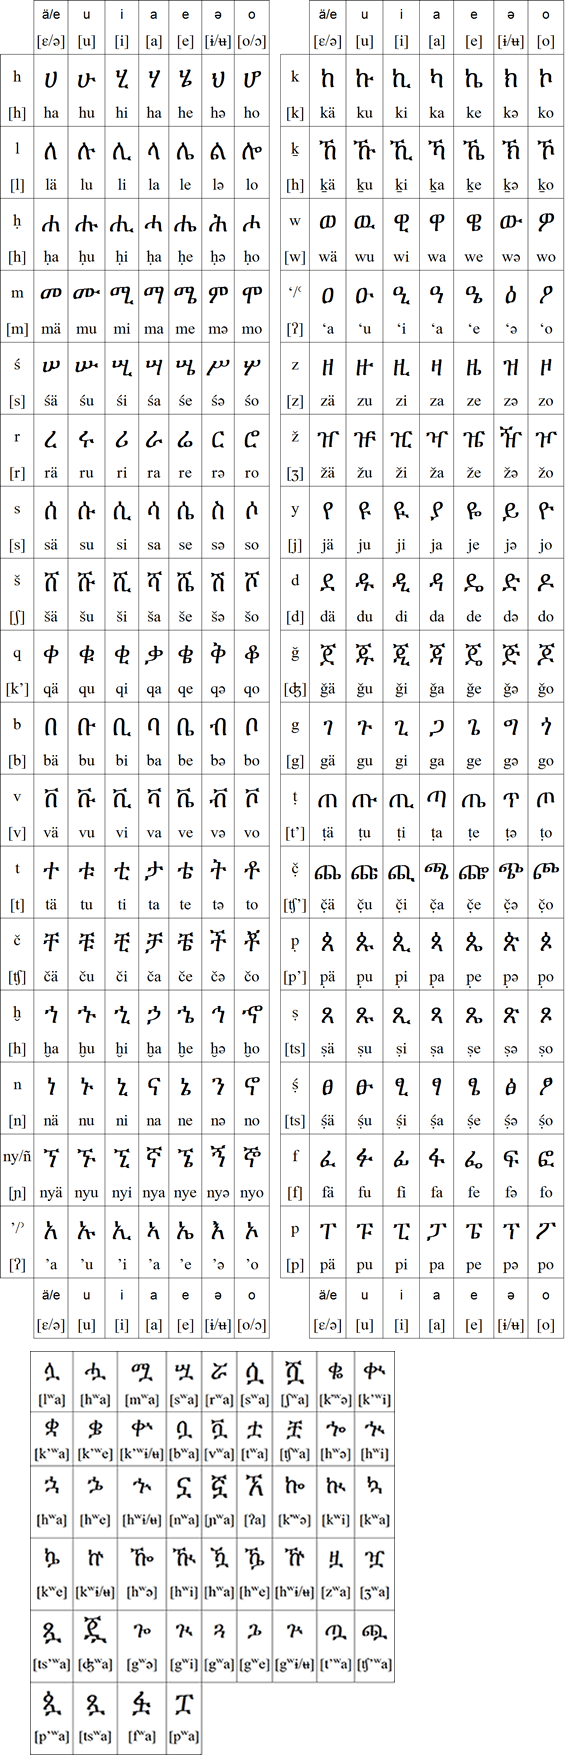 how-to-write-amharic-letters-writing